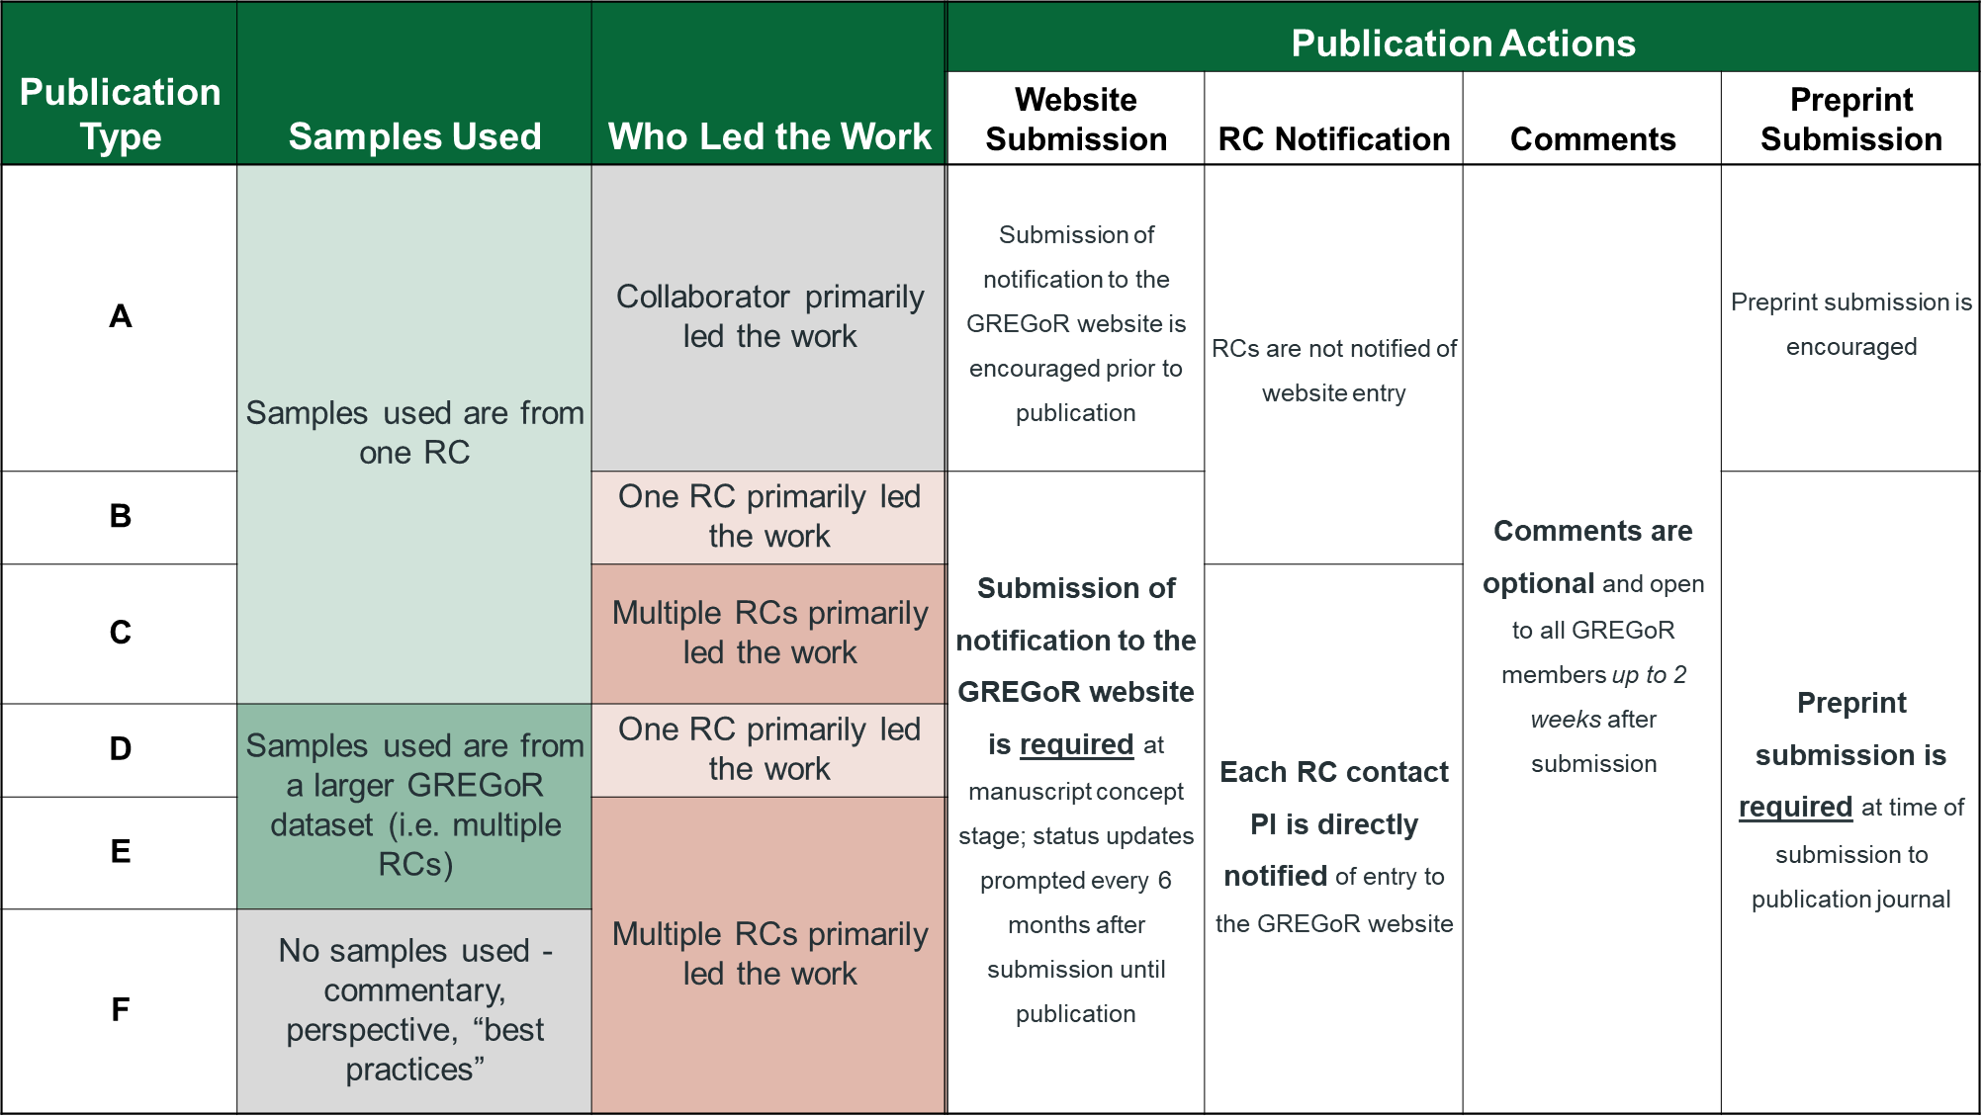 Summary table of Publication Types, Policies, and Processes